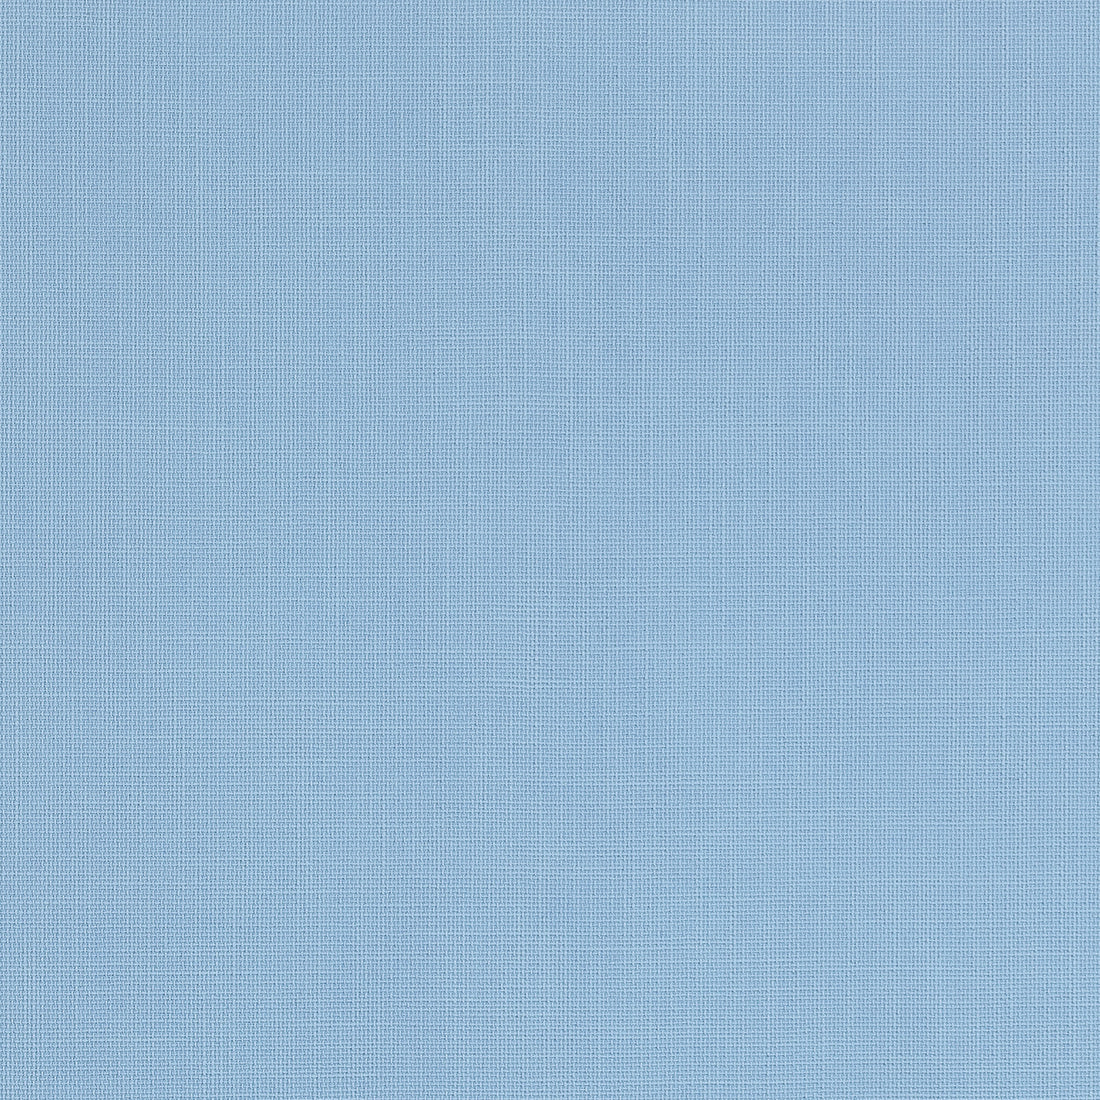 Brynn fabric in sky color - pattern number W81683 - by Thibaut in the Locale collection